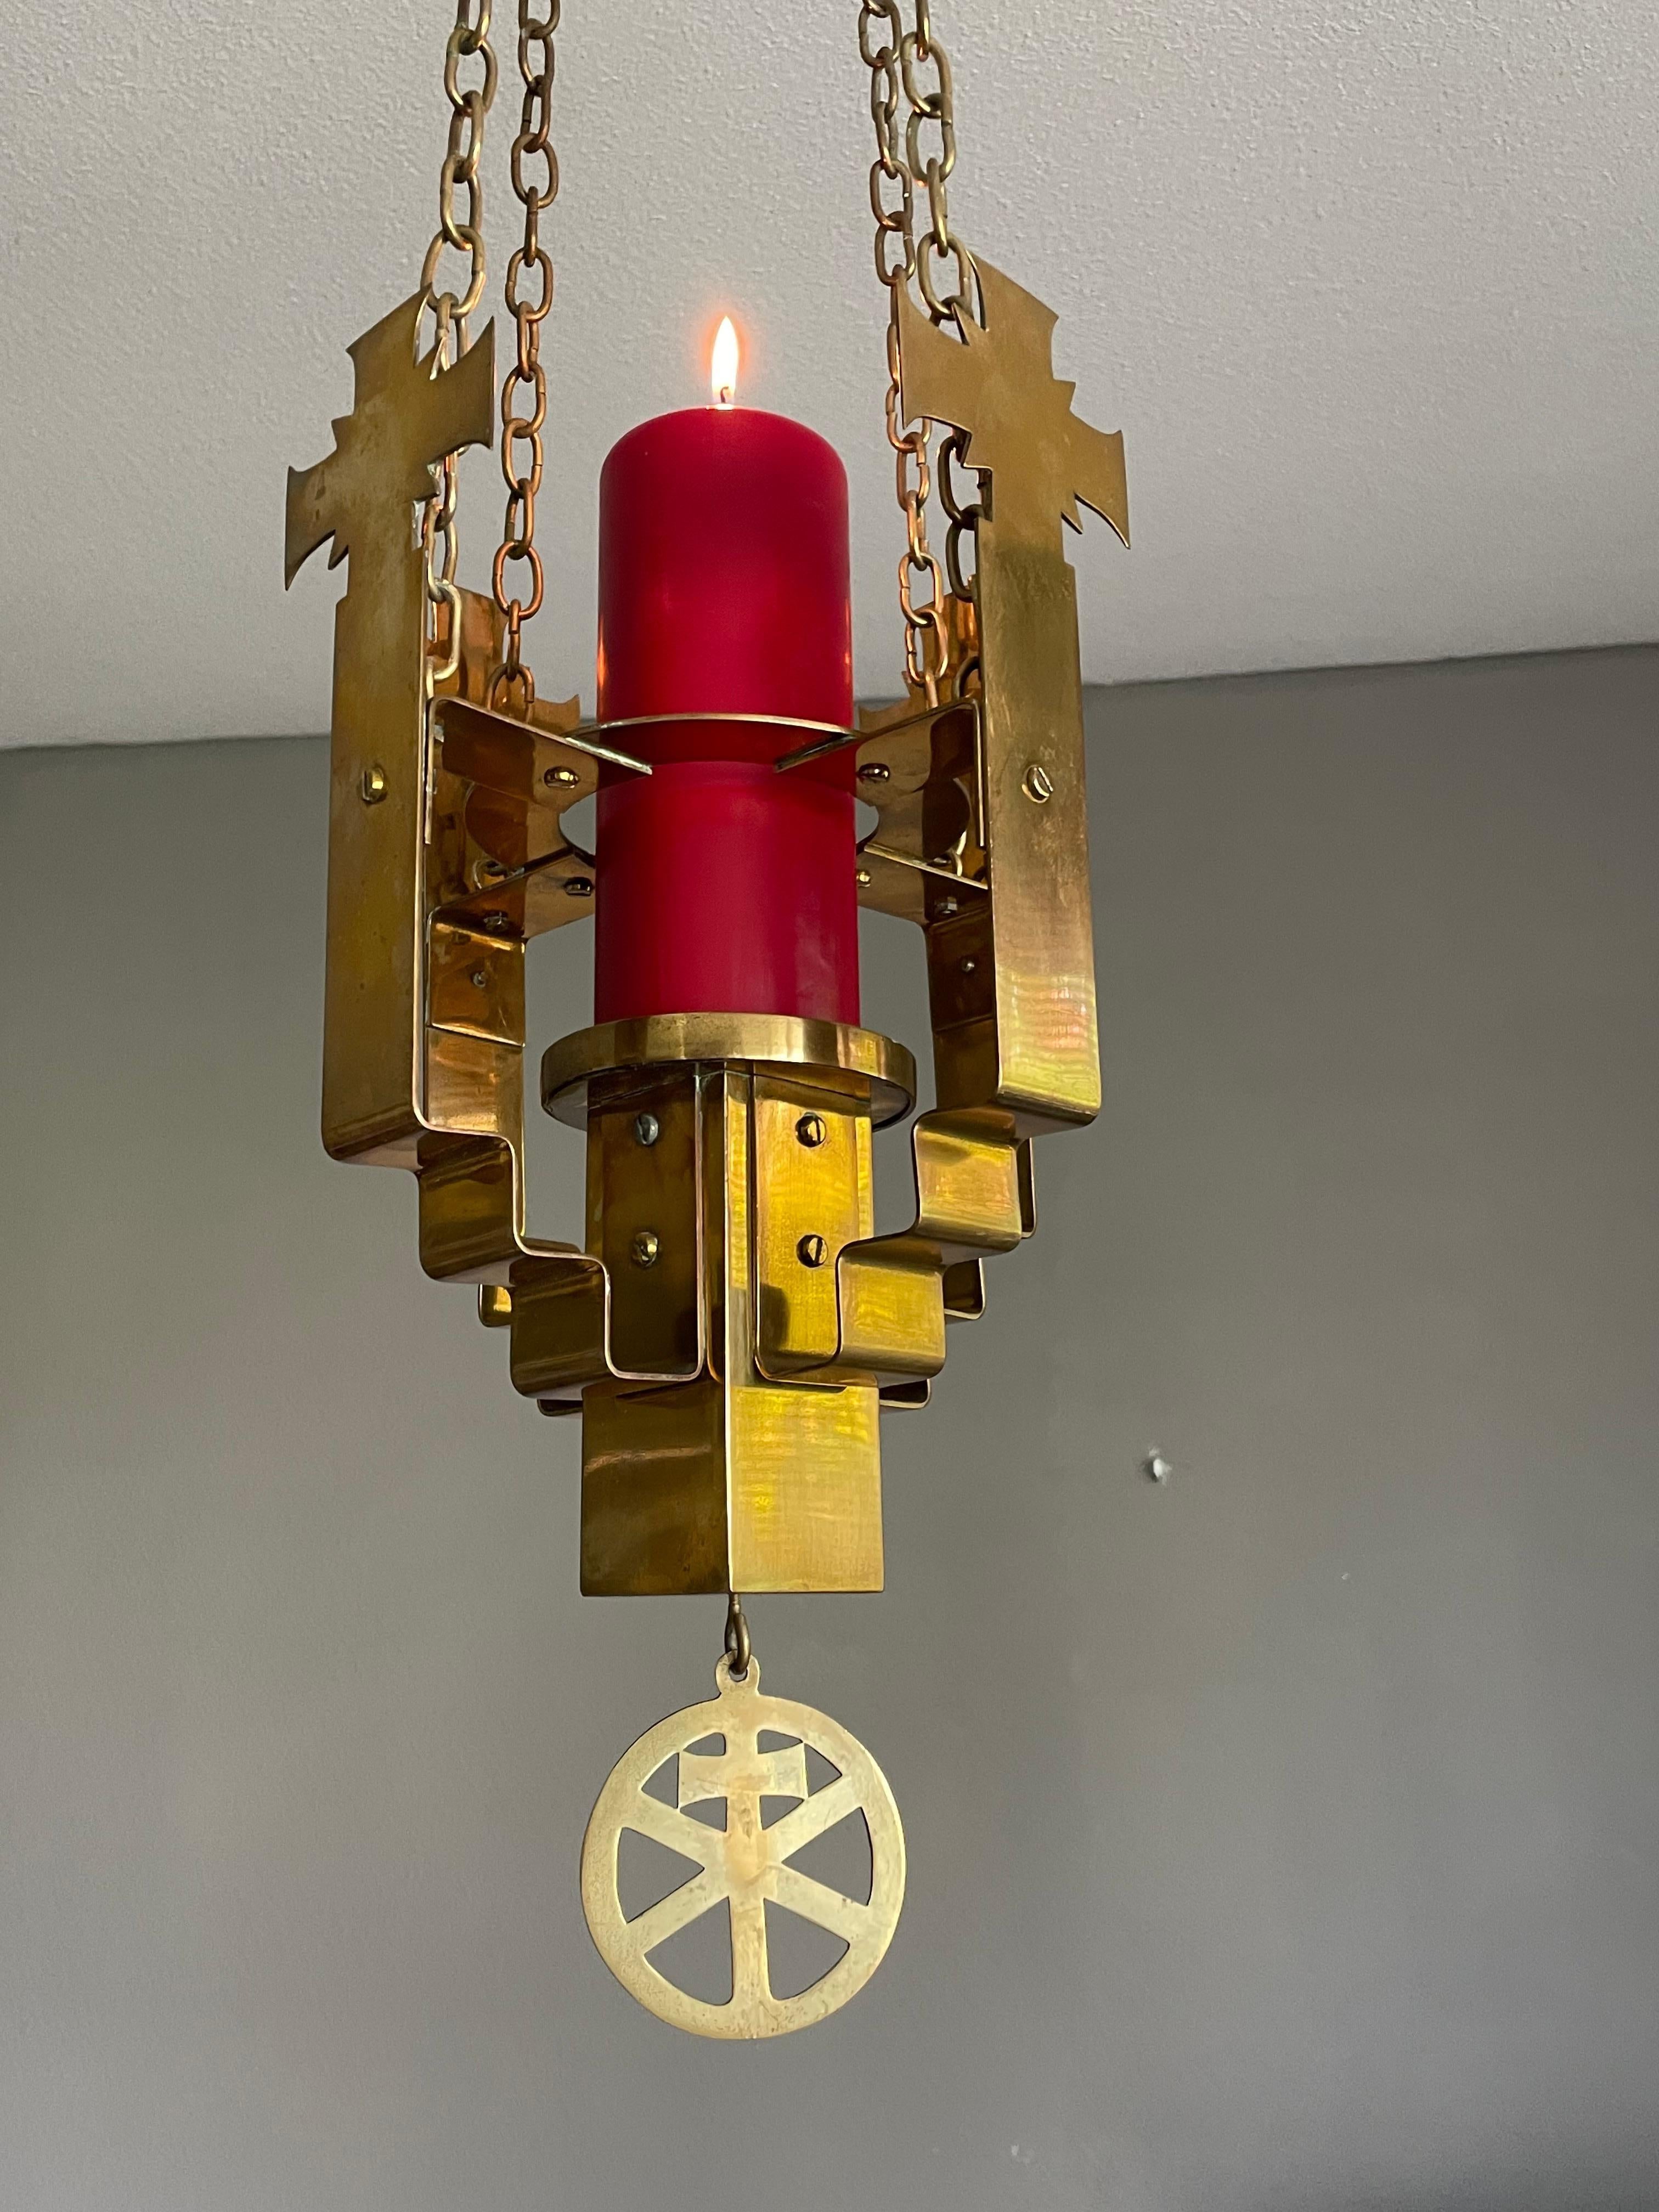 Beautiful and meaningful work of religious art for a serene atmosphere.

This practical size and compact church candle chandelier is perfect for creating a spiritual atmosphere. All handcrafted in the Art Deco era one can immediately recognize the